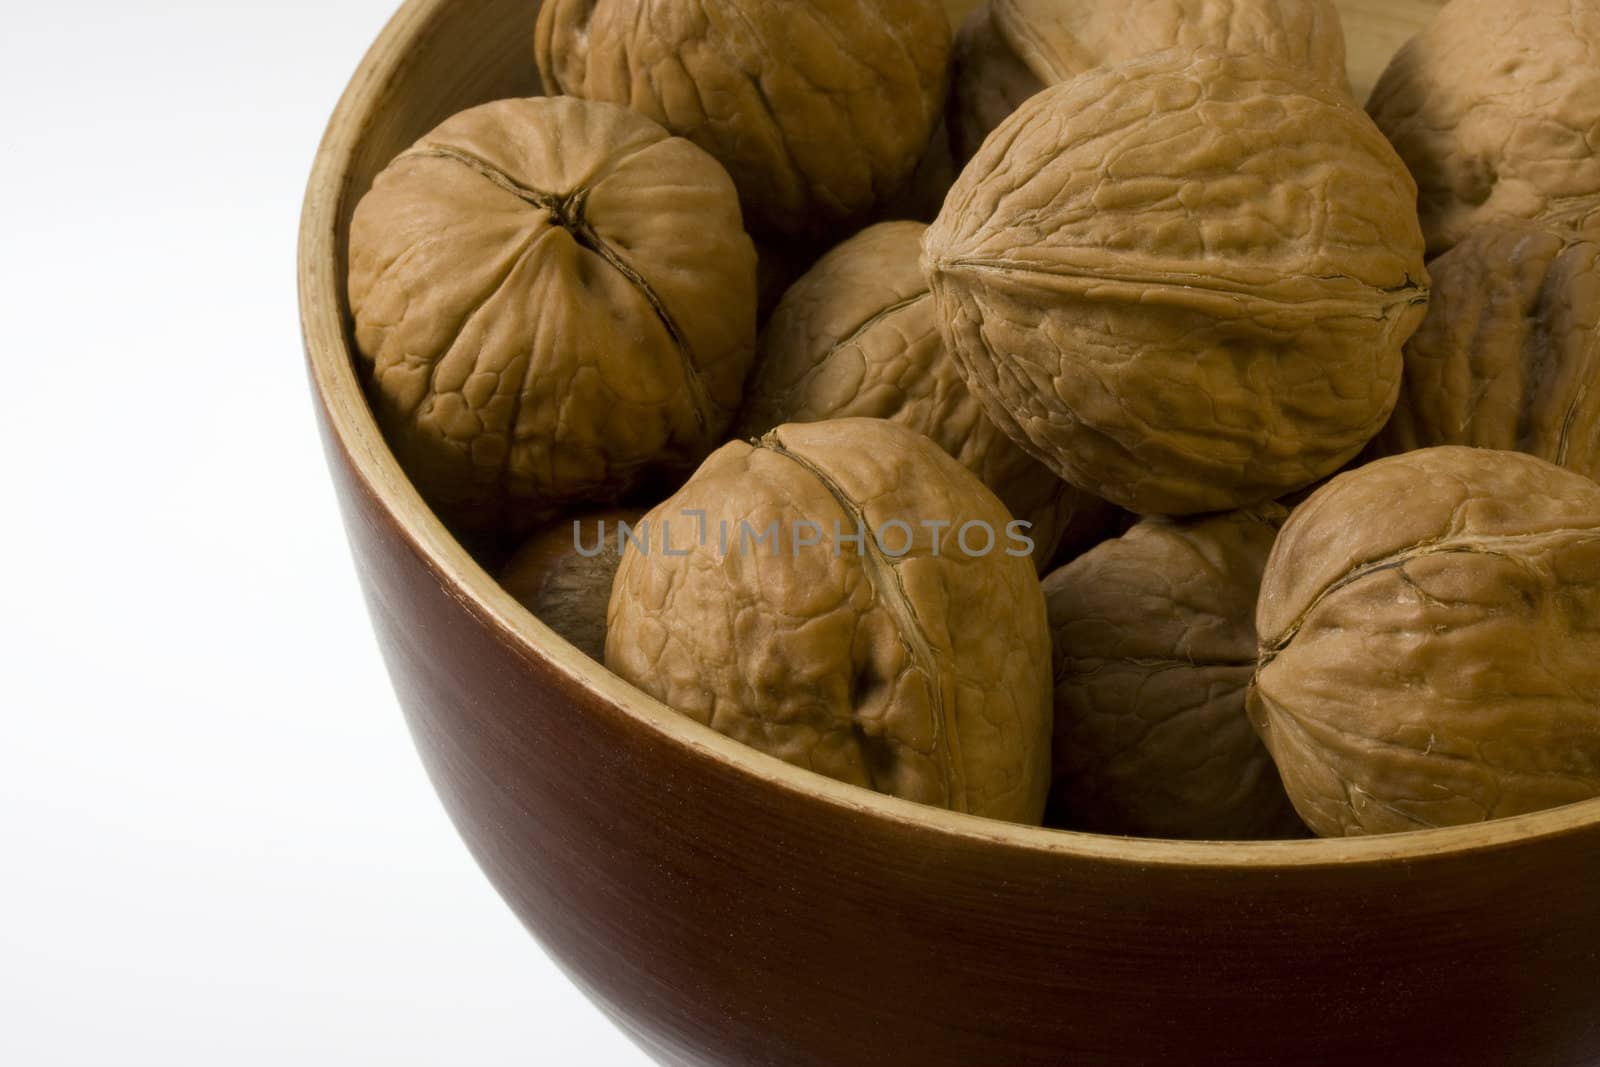 a wooden bowl of walnuts against white background, copy space